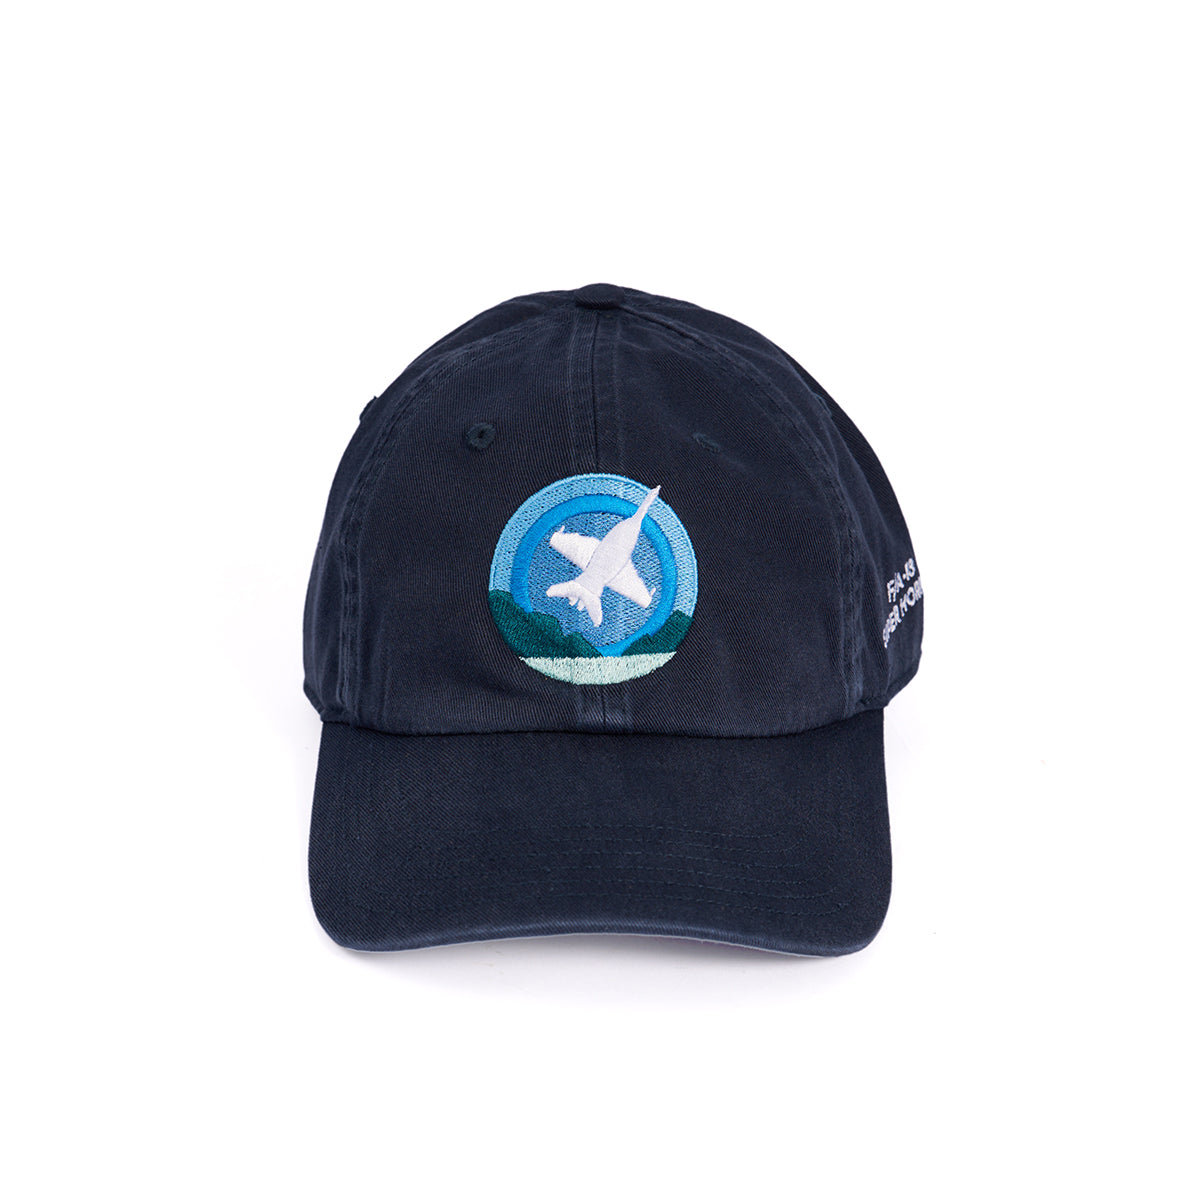 Skyward hat, featuring the iconic Boeing F/A-18 Super Hornet embroidered in a roundel design on the front.